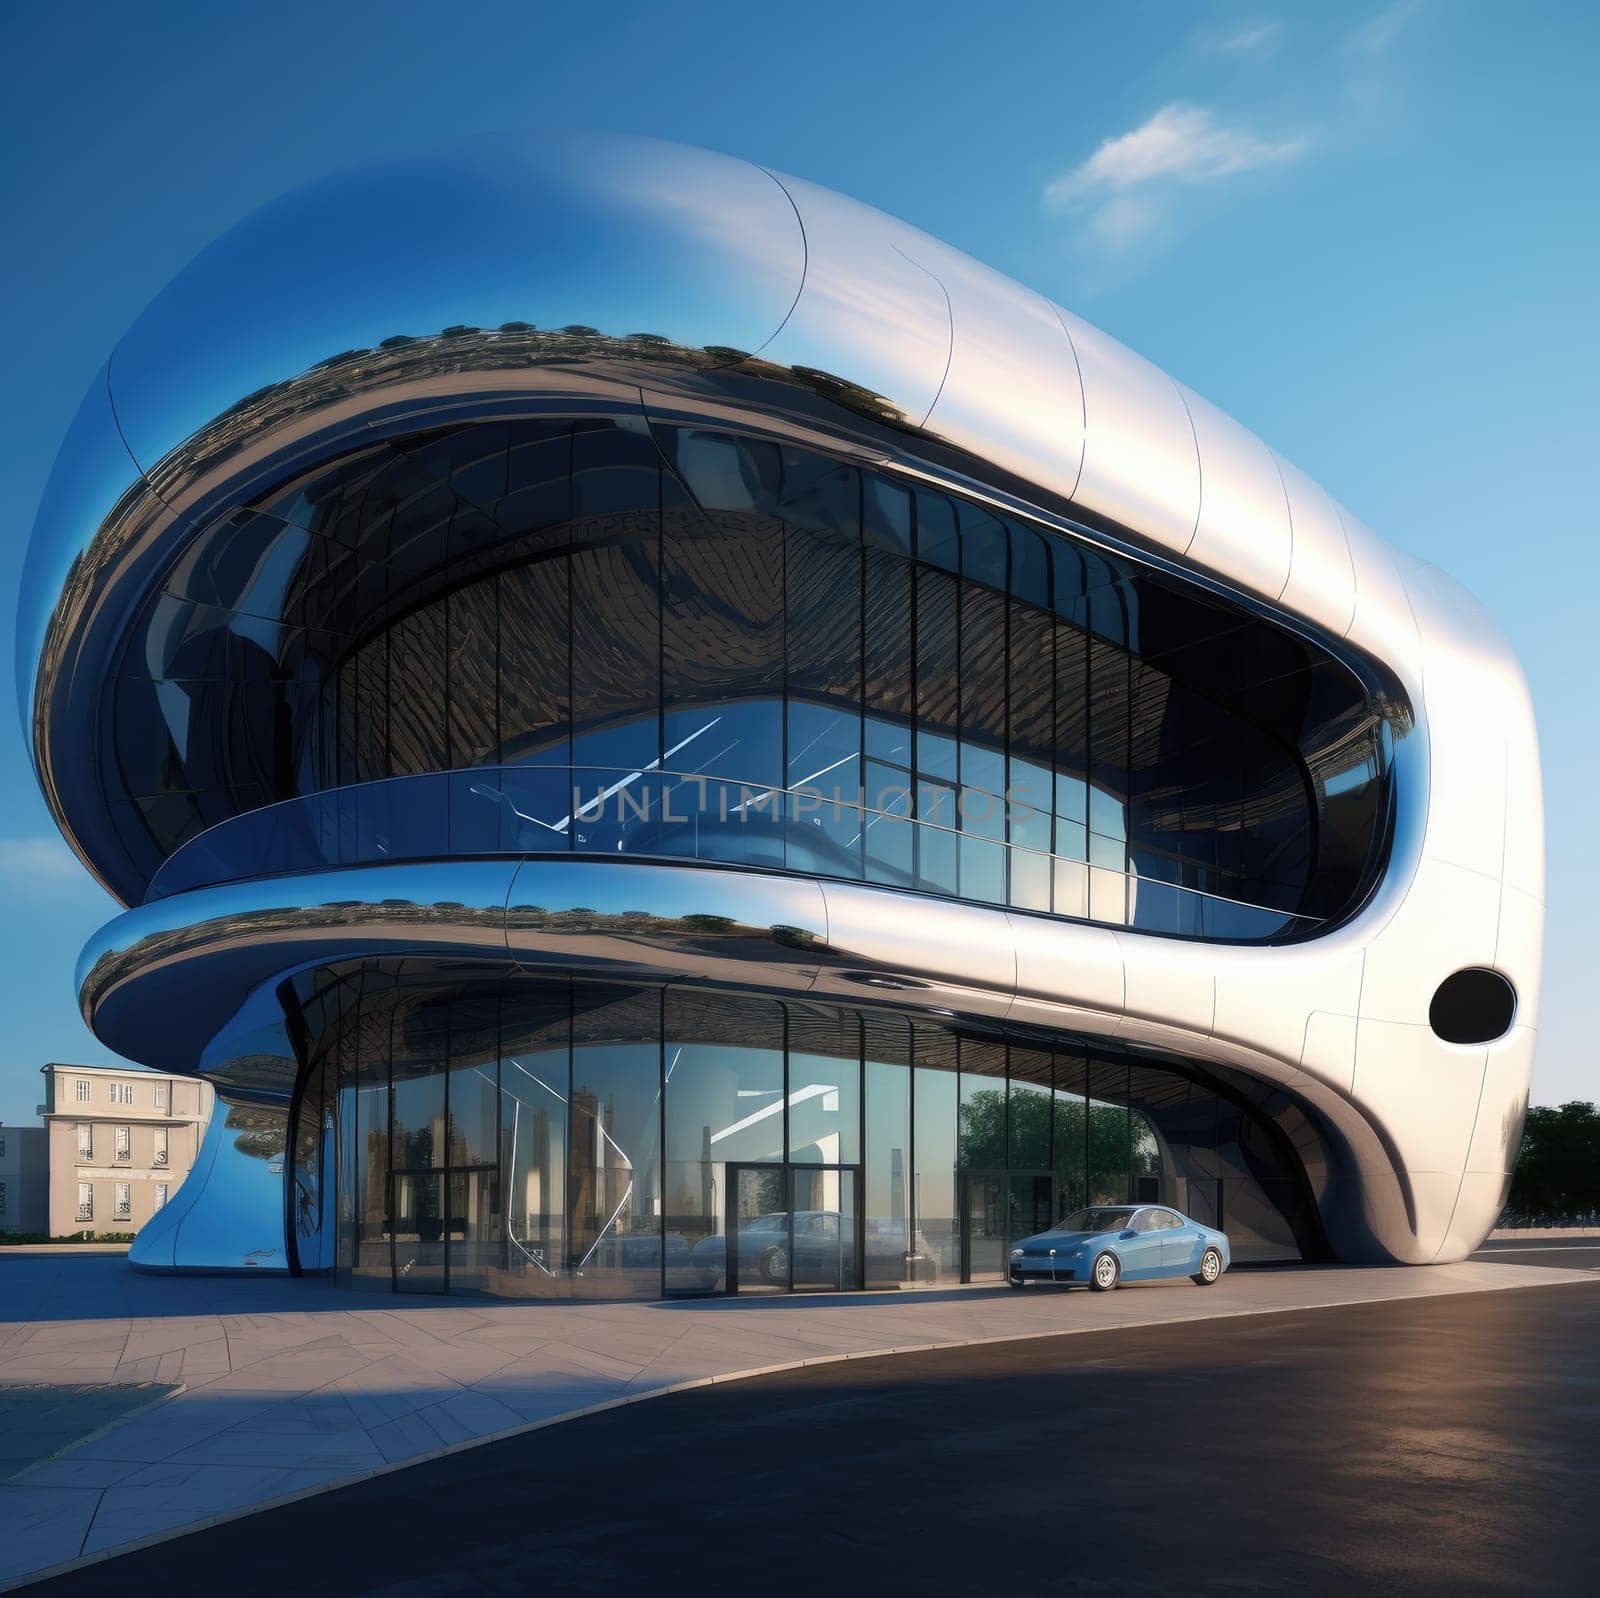 The exterior of the building of the future. Glass facade by cherezoff